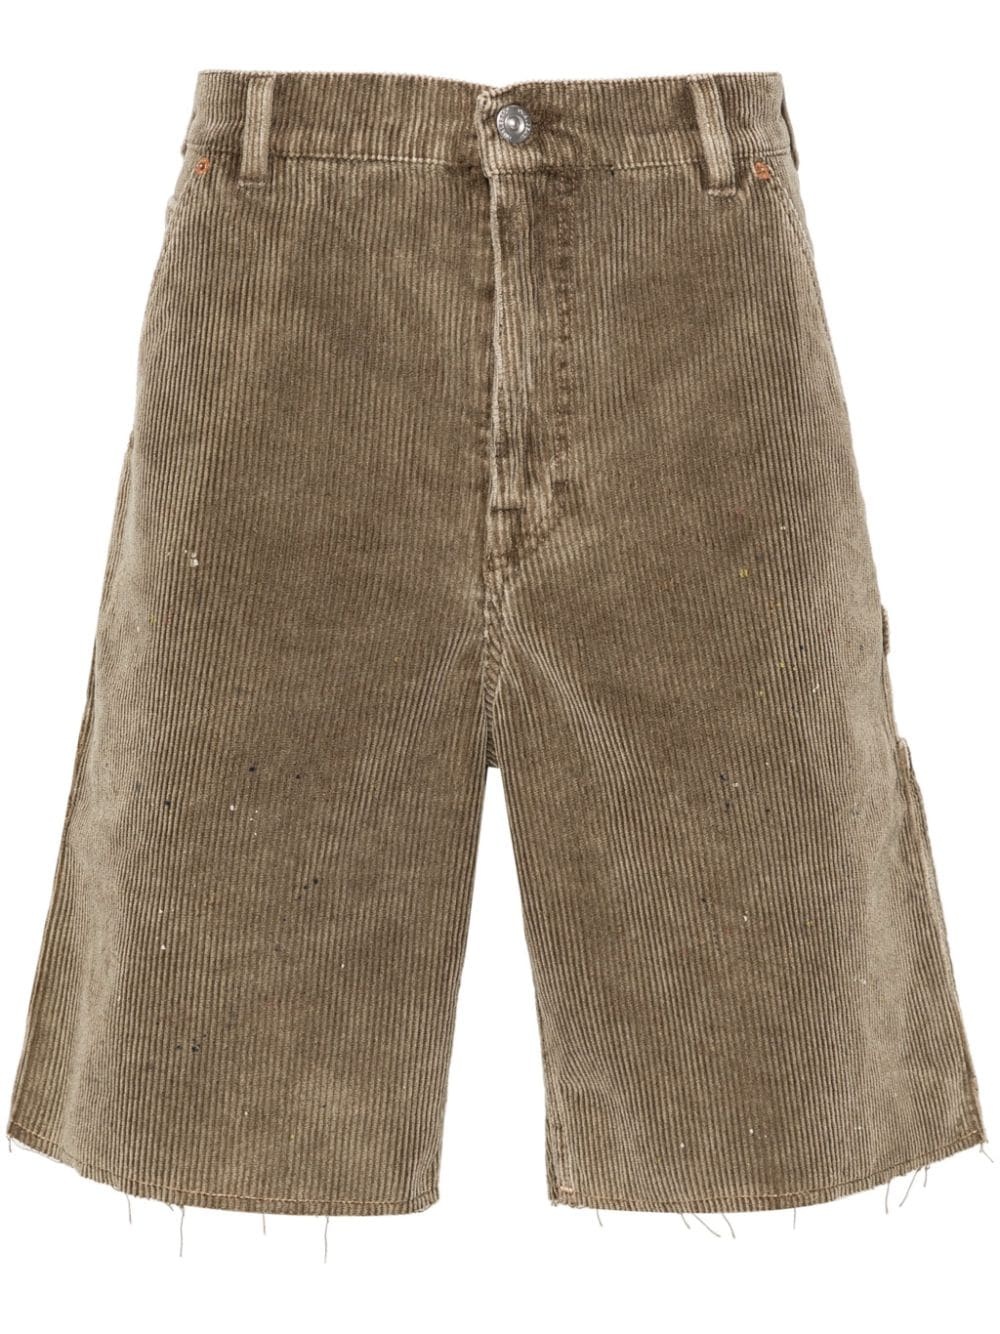 Joiner corduroy high-rise shorts - 1